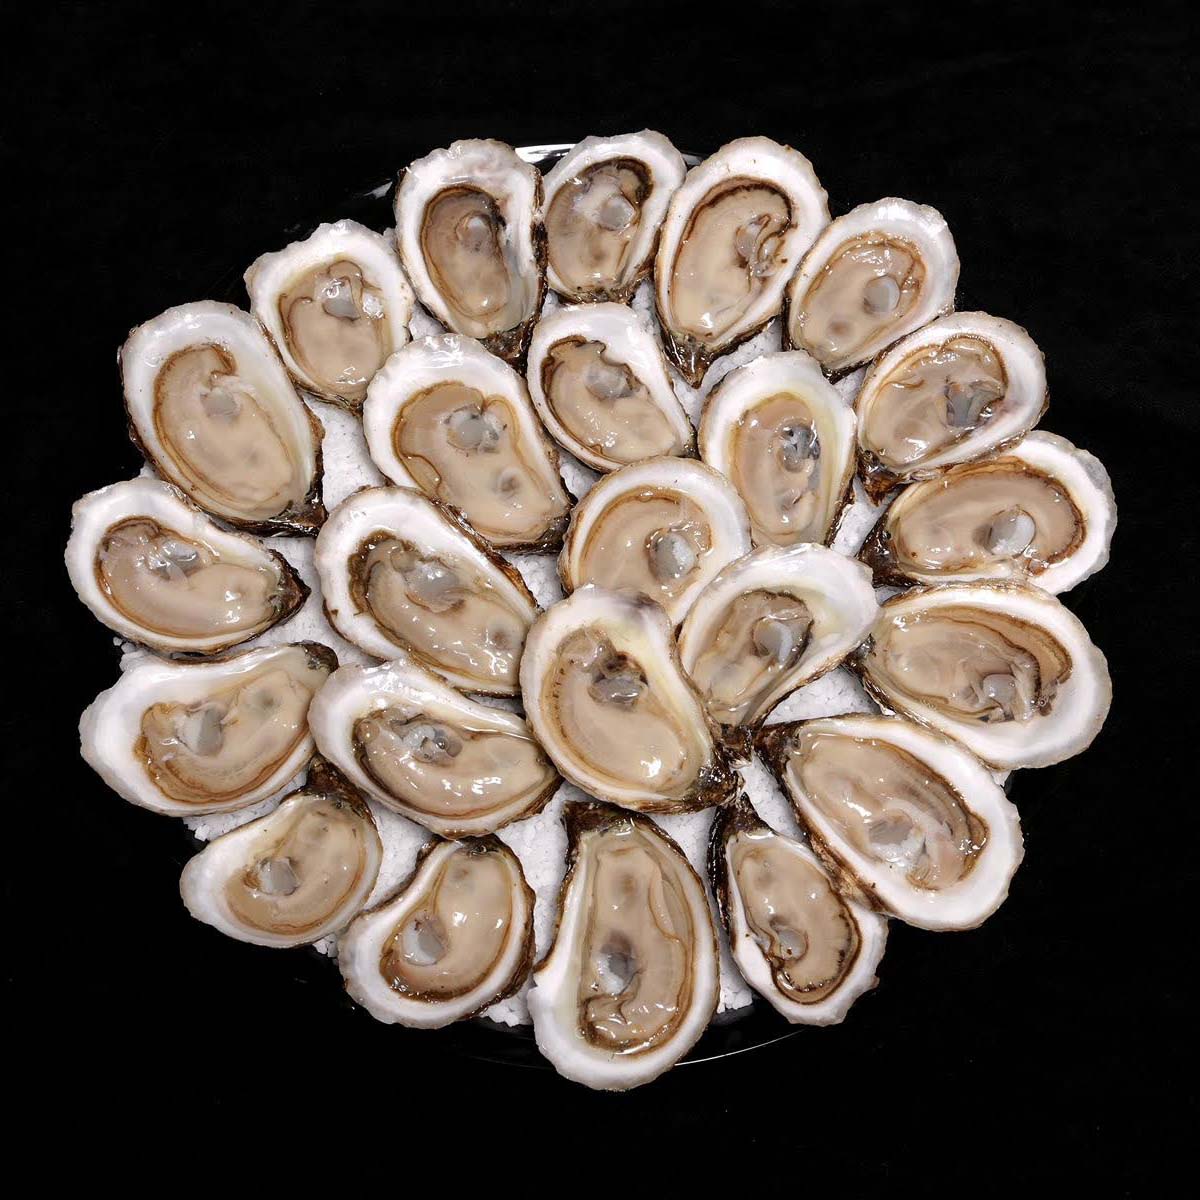 Raspberry Point & Lucky Limes Oysters -DUO Explorer Platter of 36 Pre-Opened Oysters on ICE